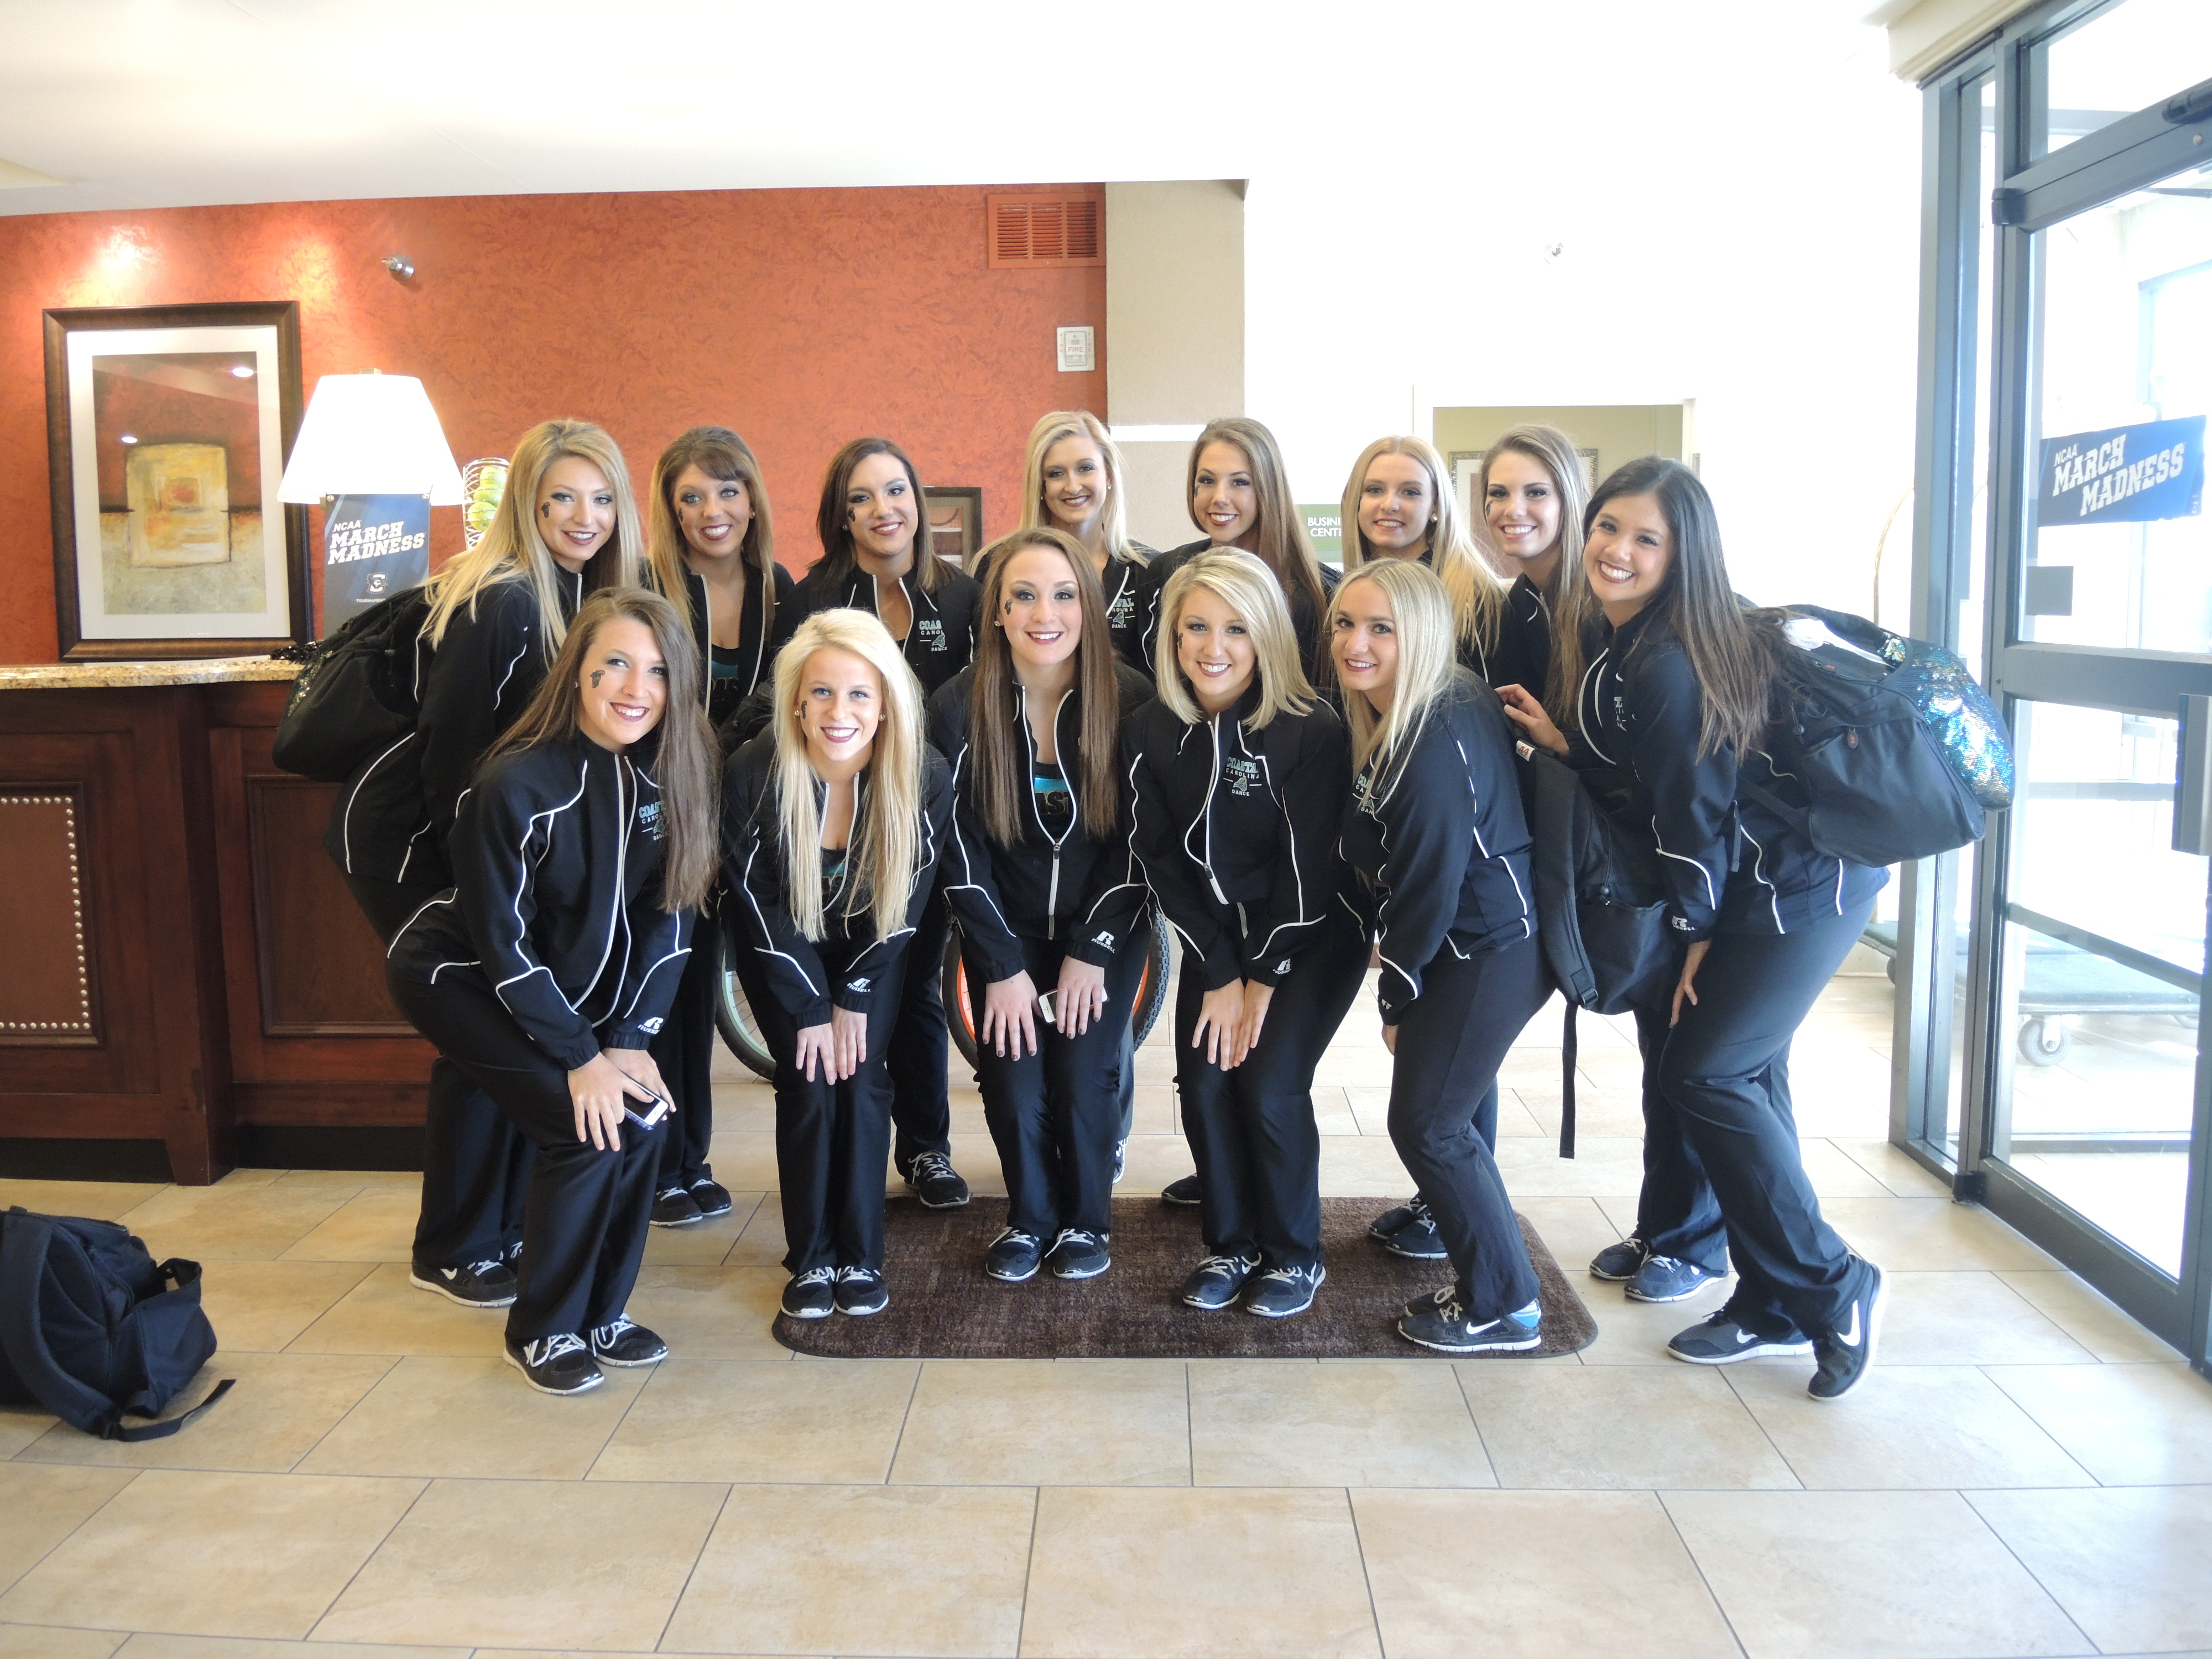 The CCU dance team, along with the pep band and cheer squad, did a great job representing Coastal.